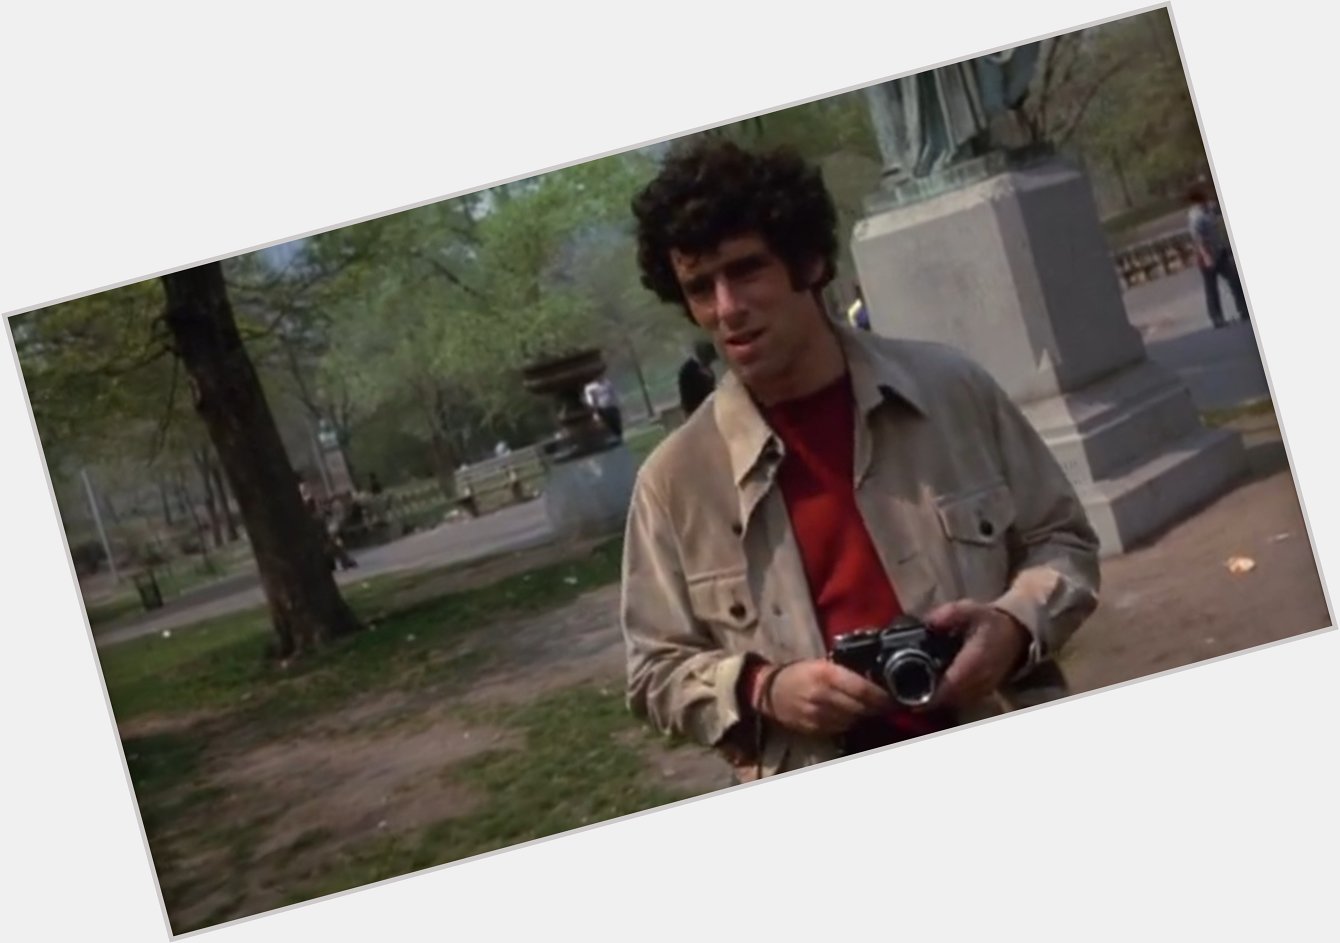 Happy Birthday to my favorite actor and Virgo King, Elliott Gould. Everyone go watch Little Murders to celebrate. 